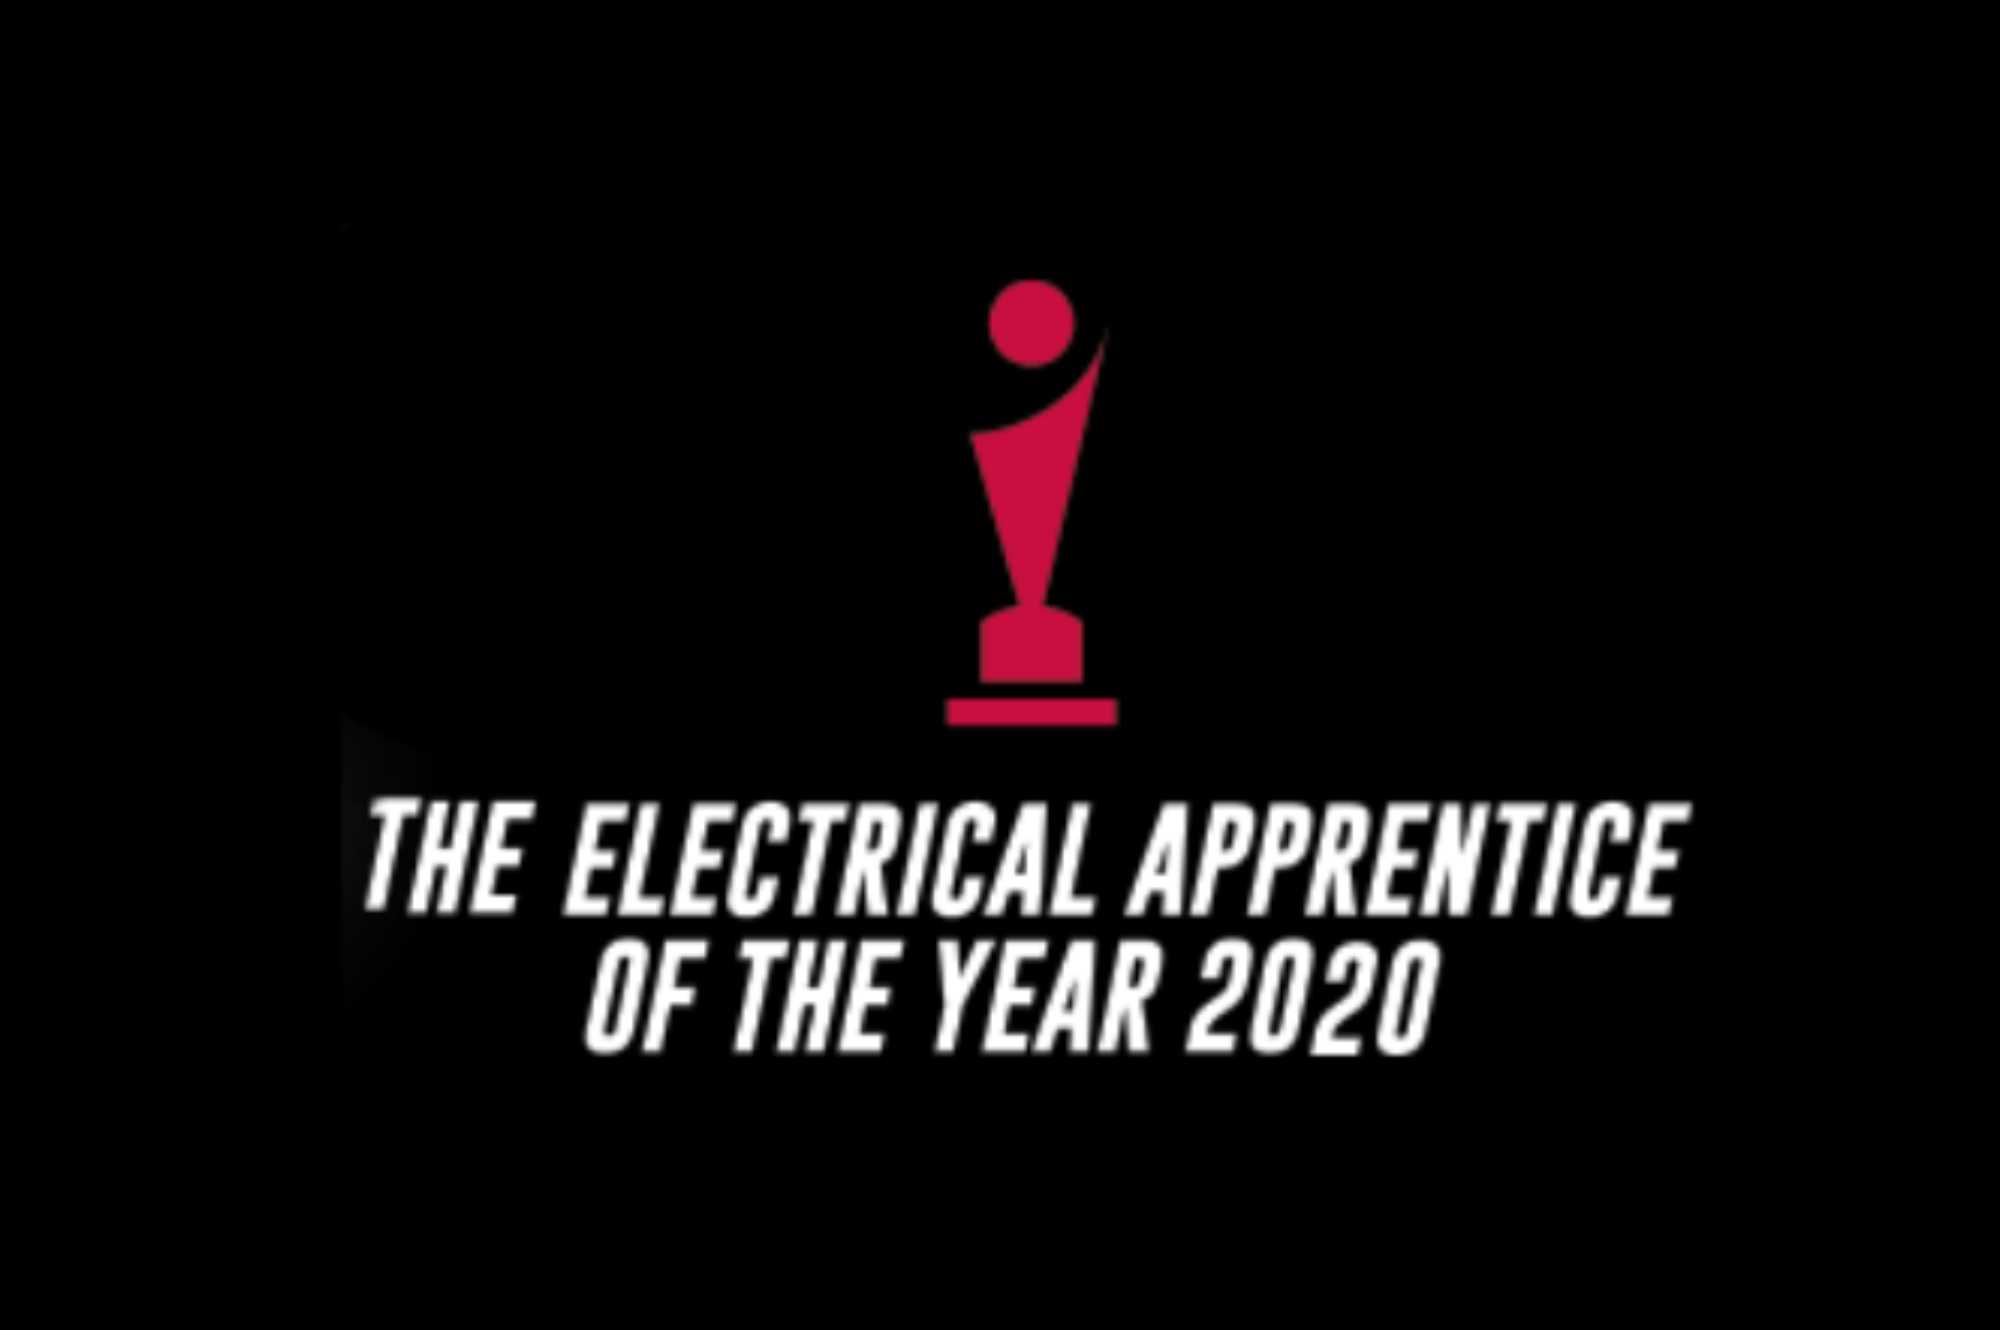 Electrical Apprentice of the year 2020